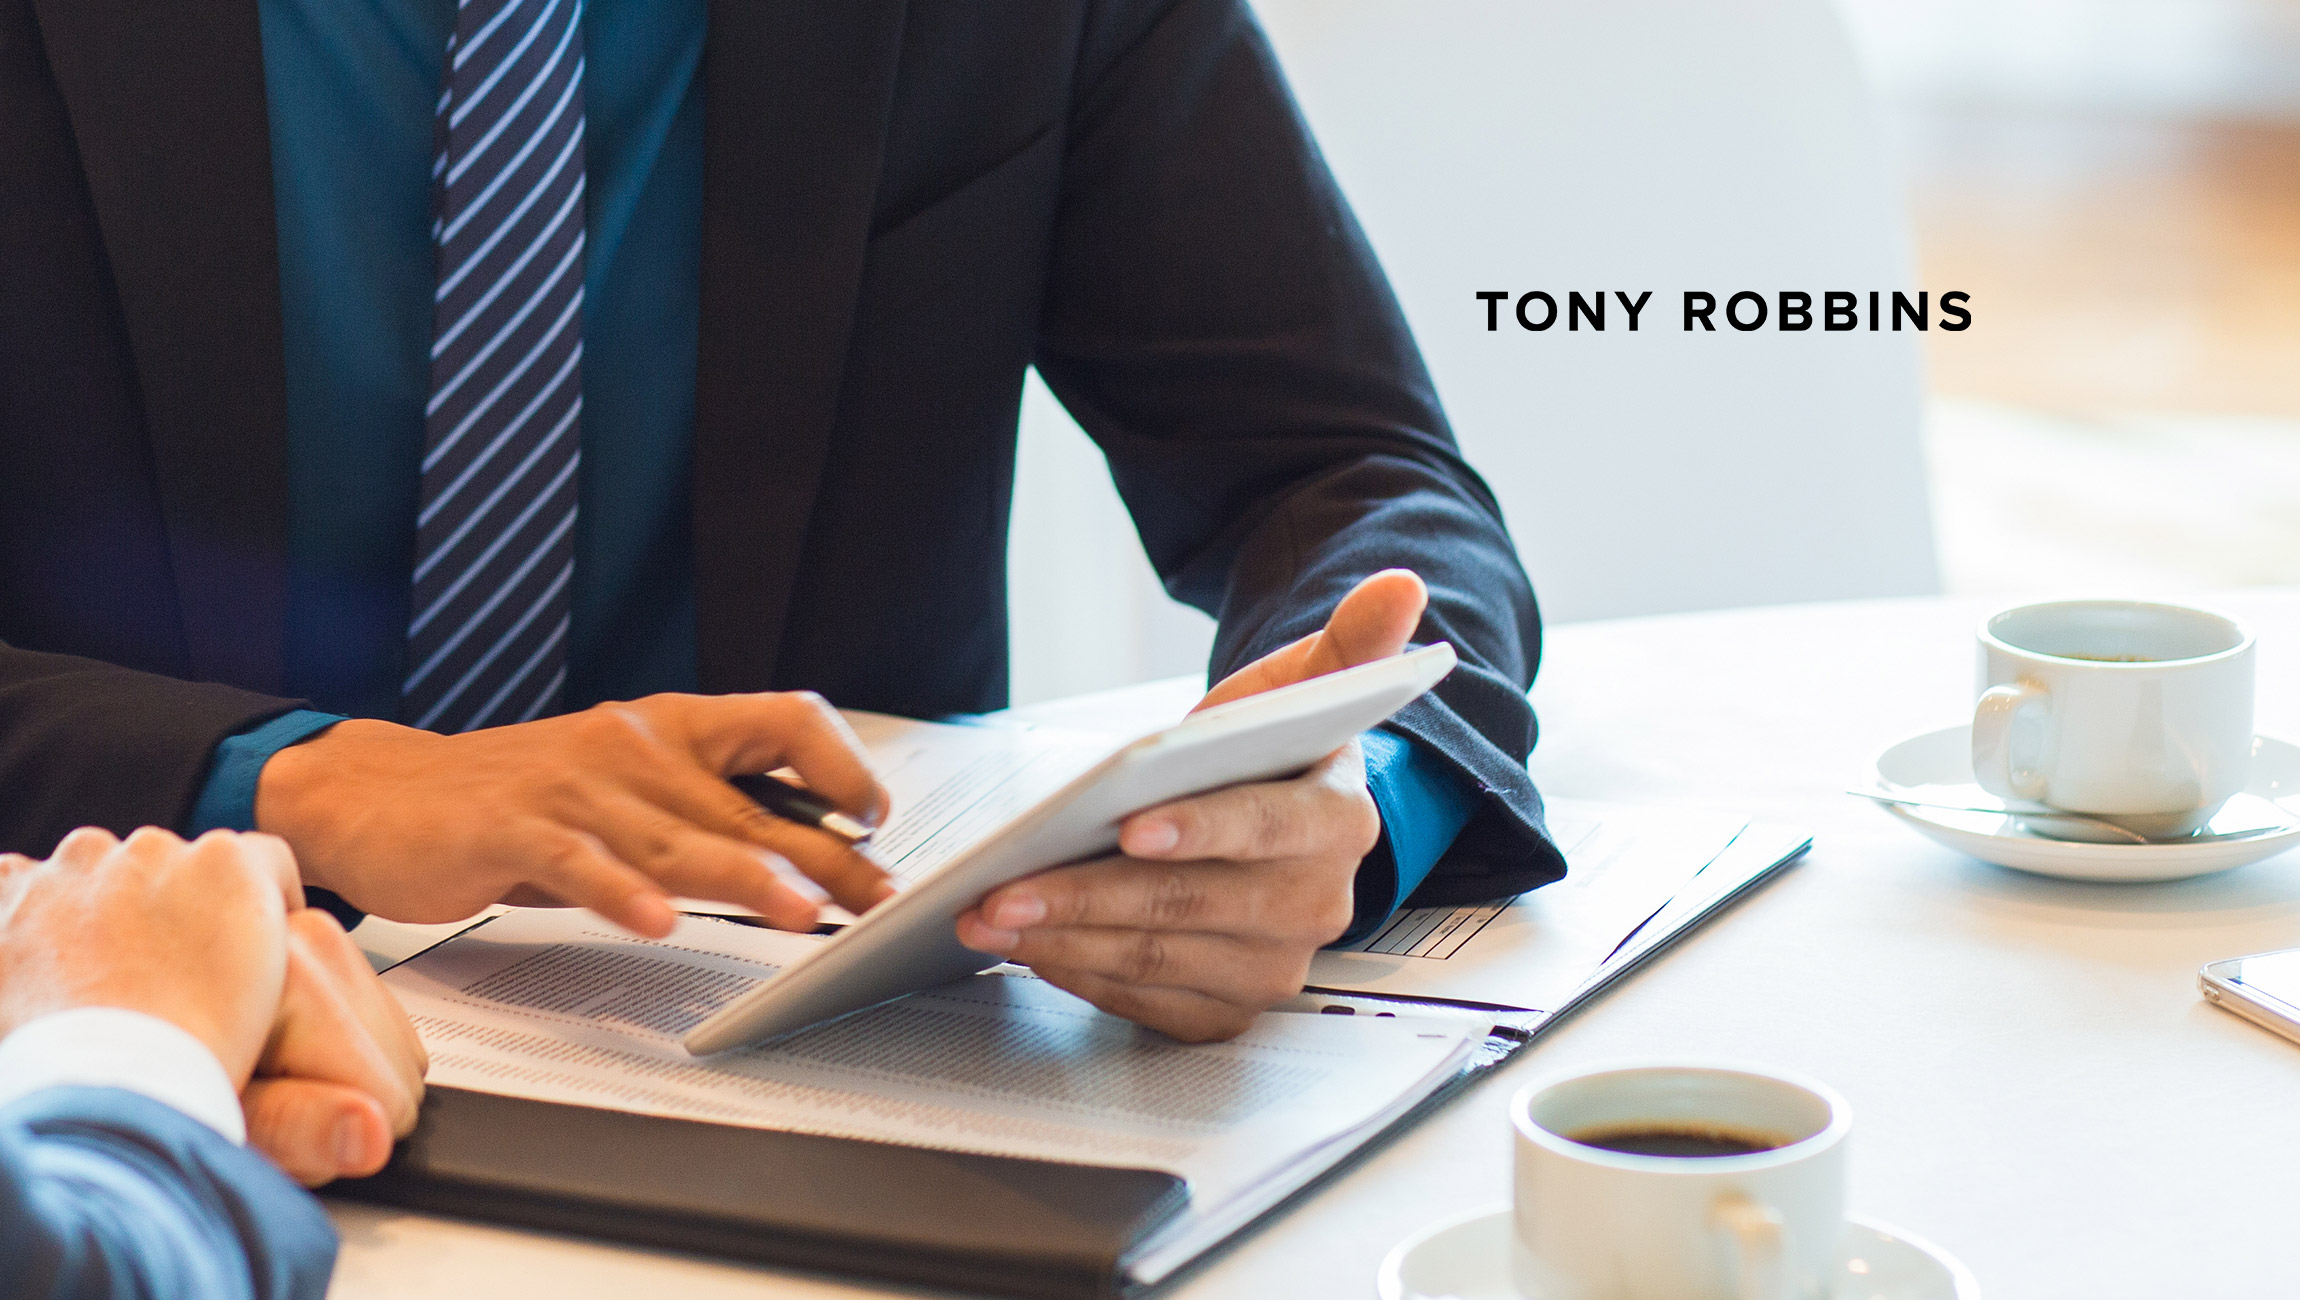 Tony Robbins and Corporate Visions to Offer New Program for Entrepreneurs and Small Business Owners